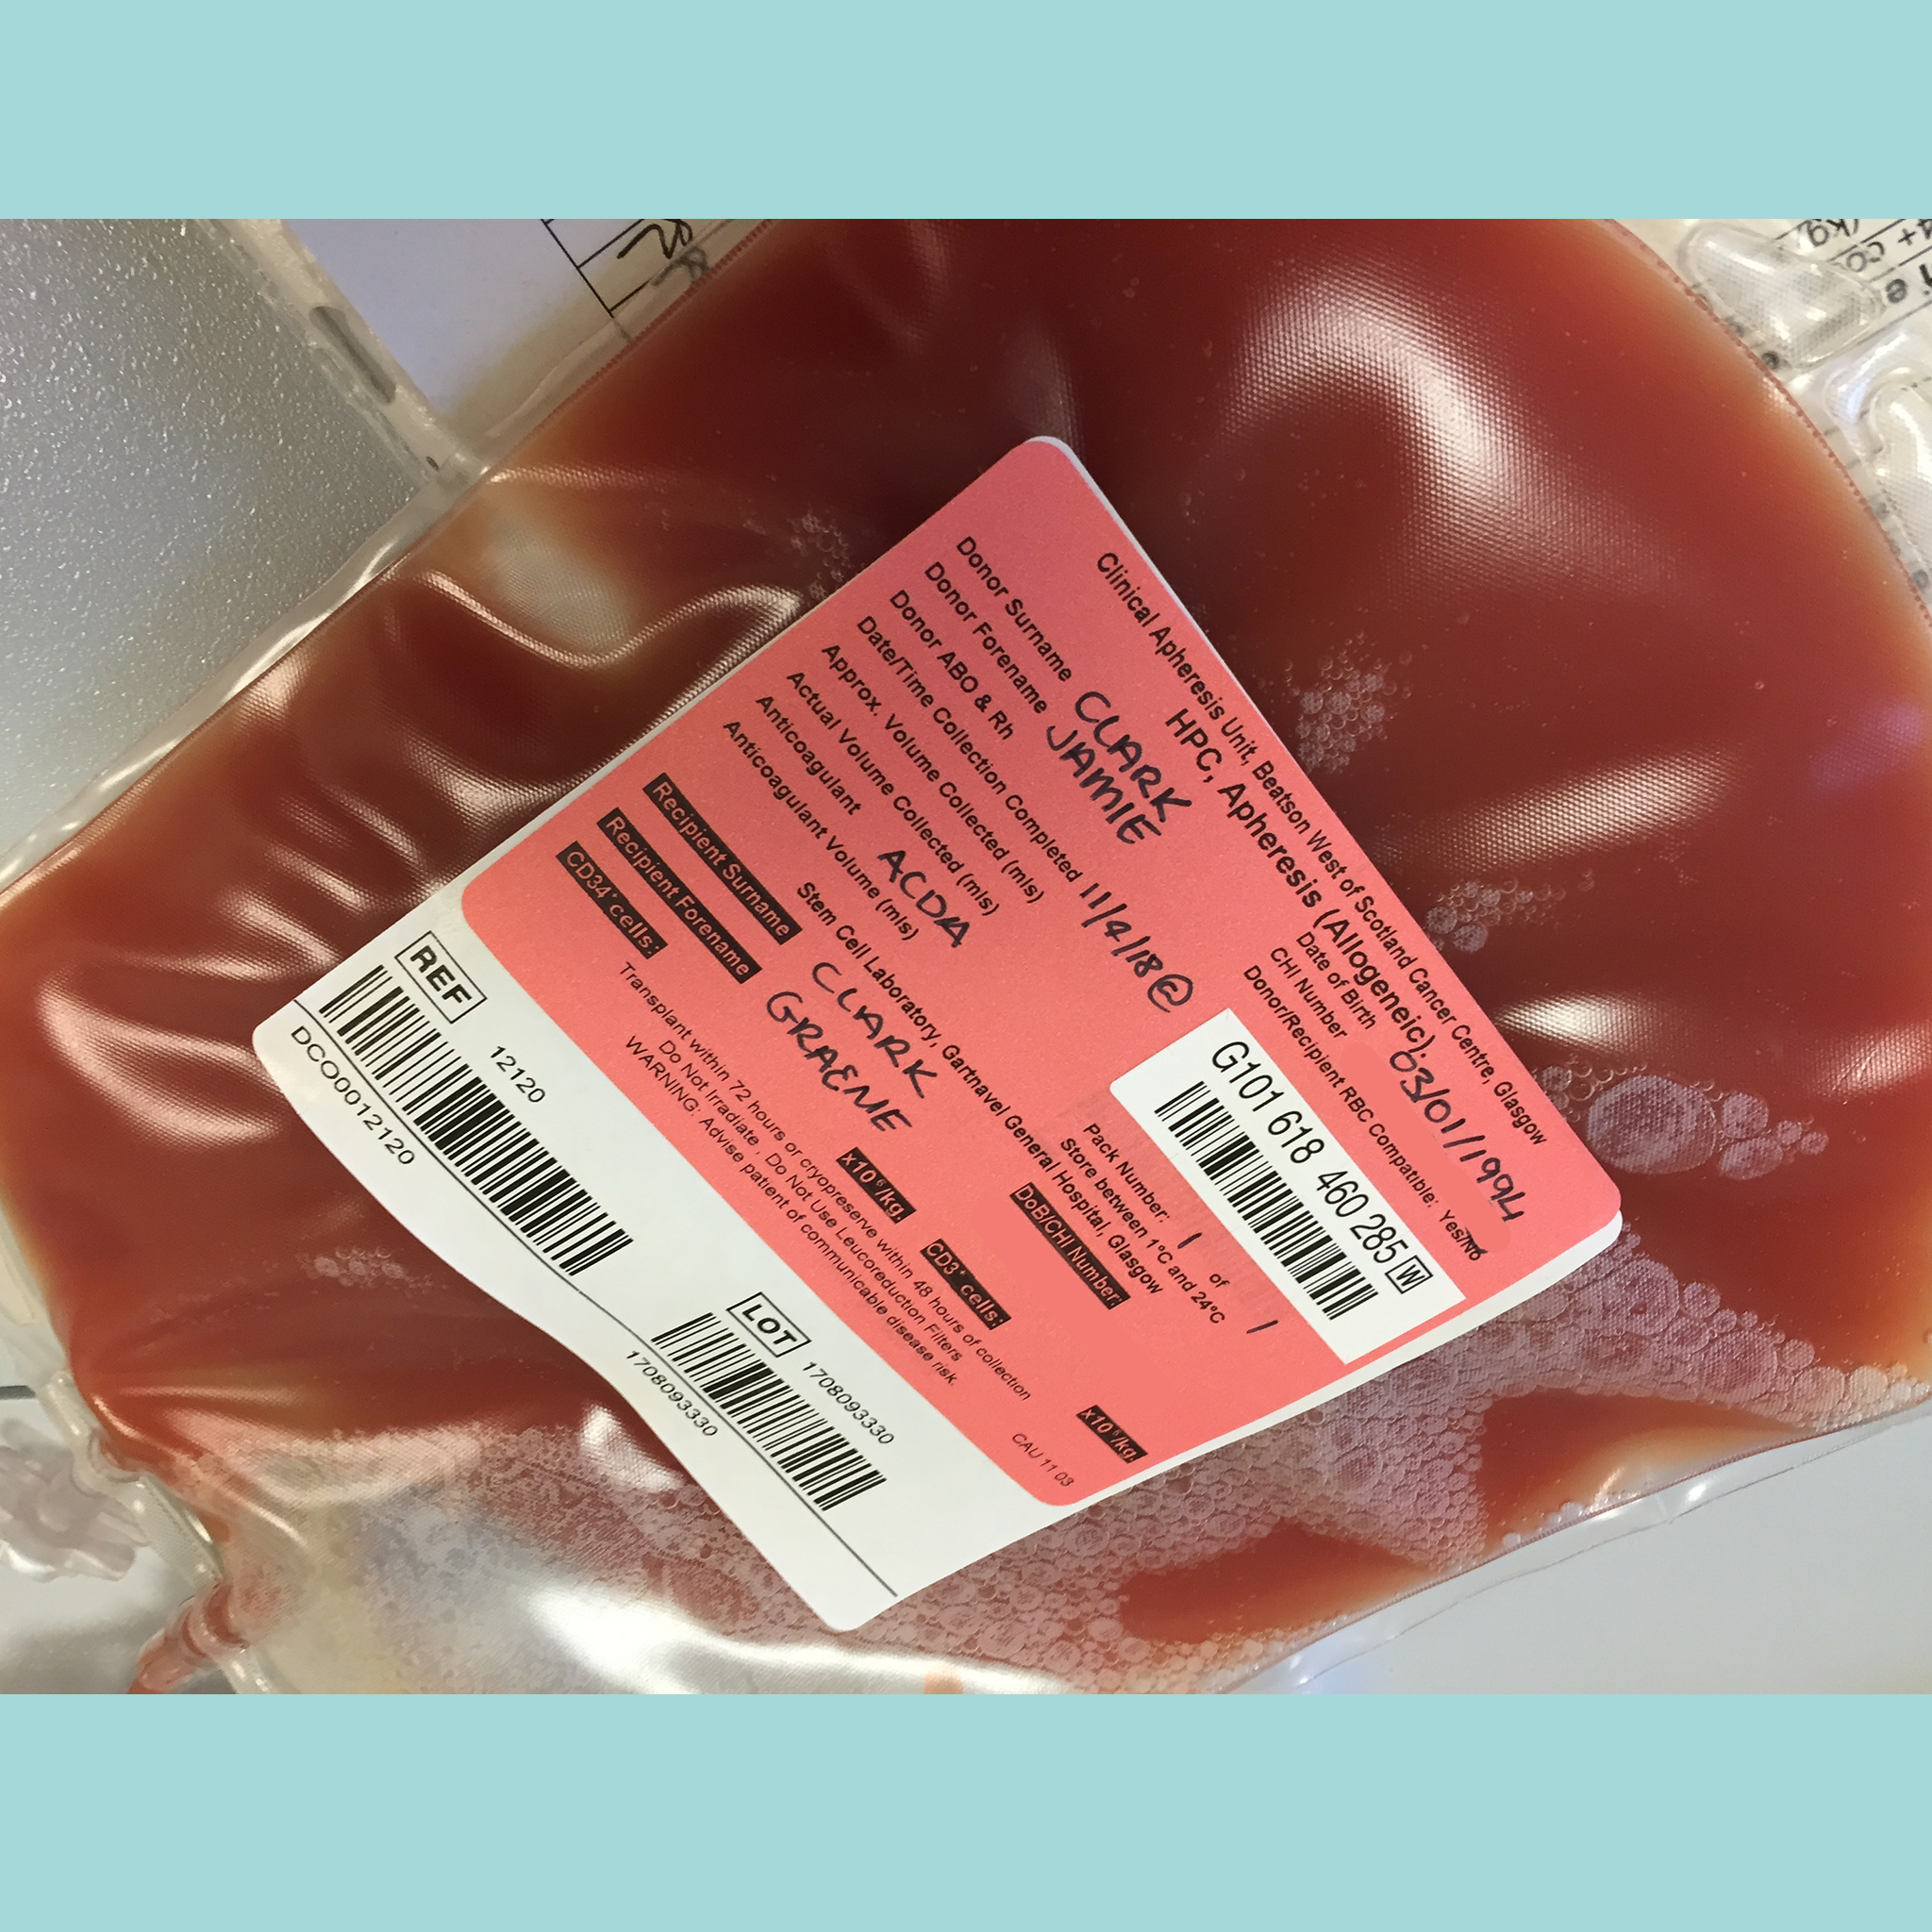 Bag of donated stem cells